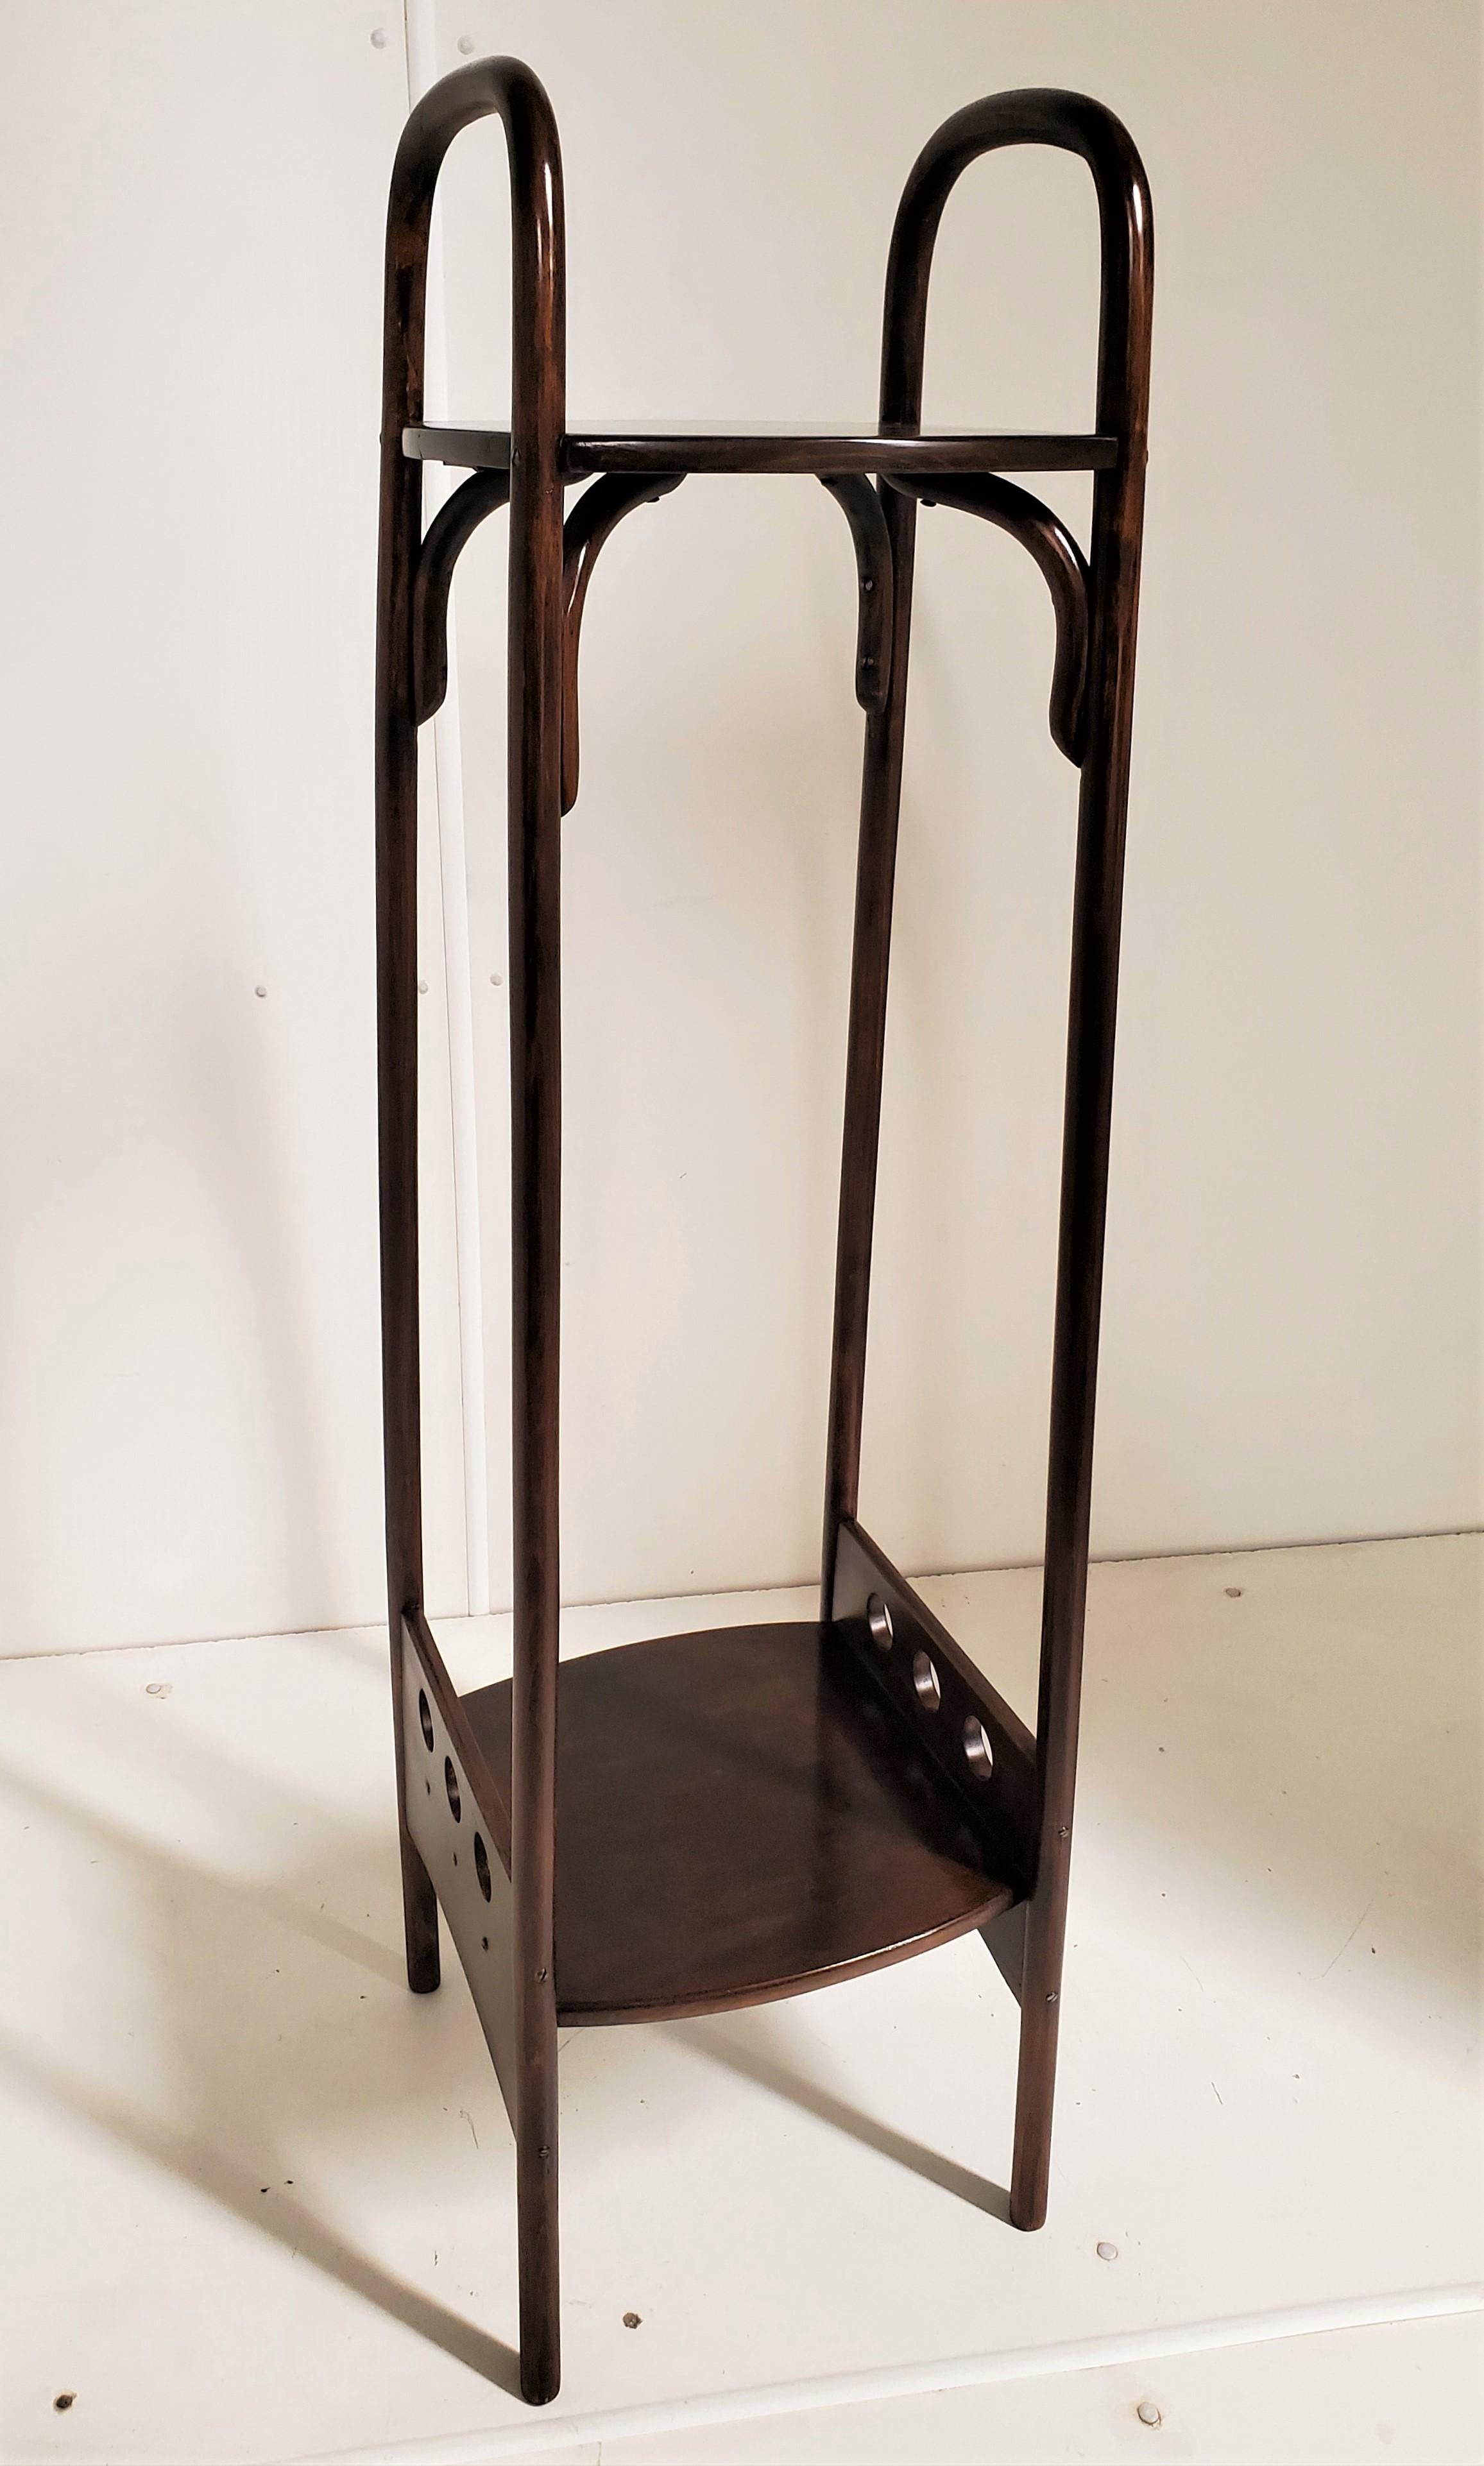 Josef Hoffman (designer) & Thonet (manufacturer) (1870-1956)
Plant holder in stained and polished beechwood with double curved arms extending the full length of the stand and culminating in a stretcher shelf with decorative openwork surround typical